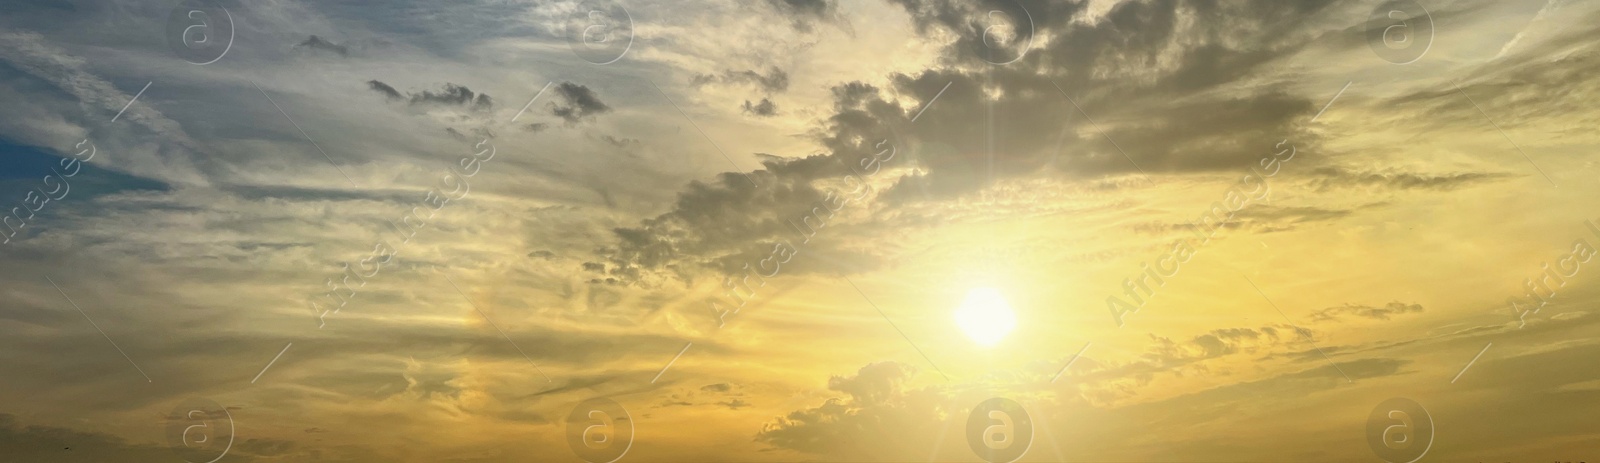 Image of Sun shining on beautiful cloudy sky at sunset, banner design